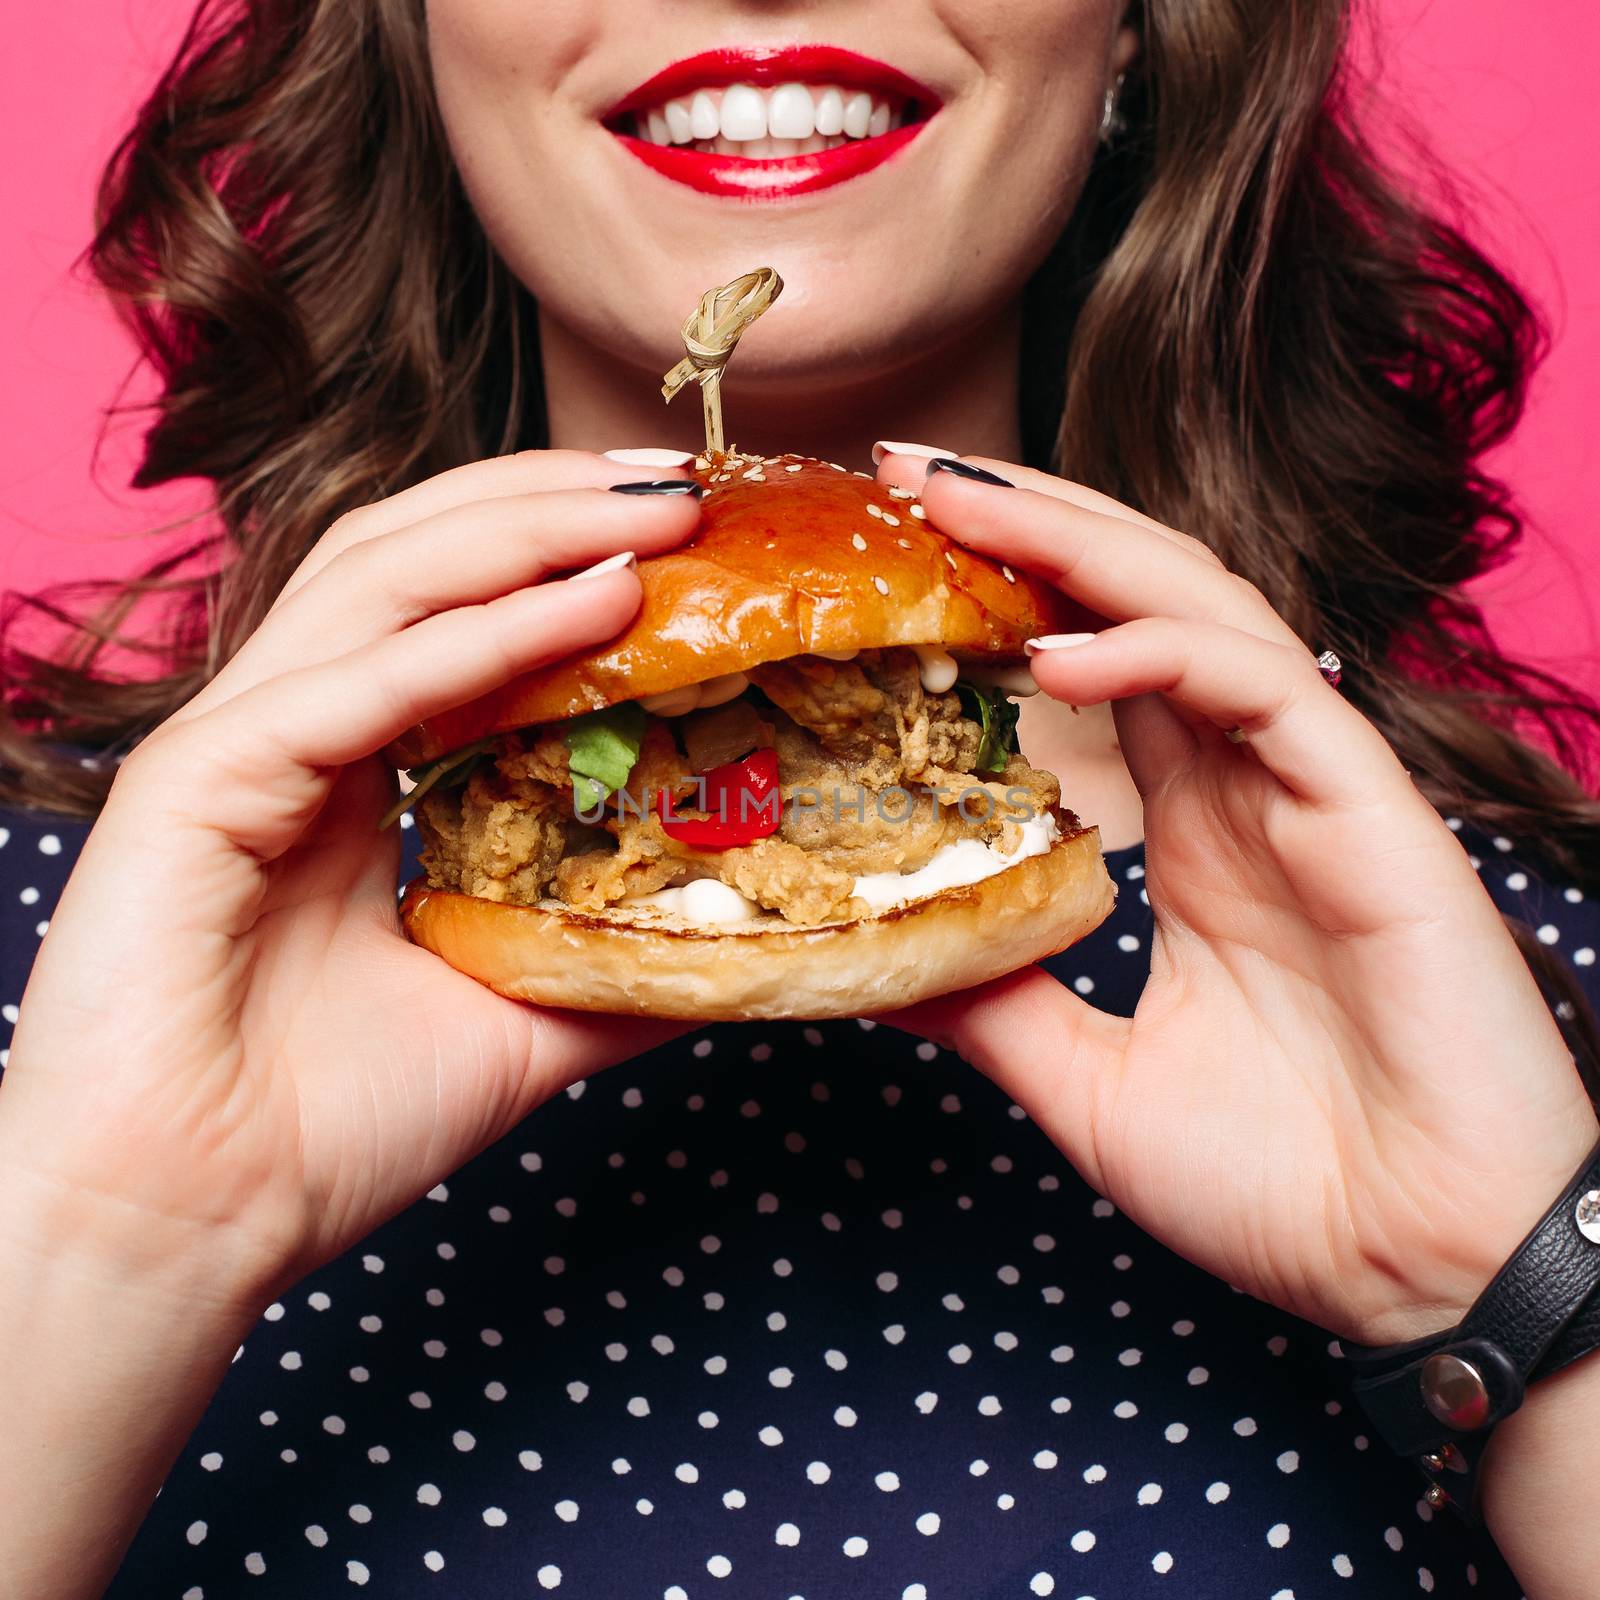 Crop of smiling woman with red lips holding juicy burger. by StudioLucky